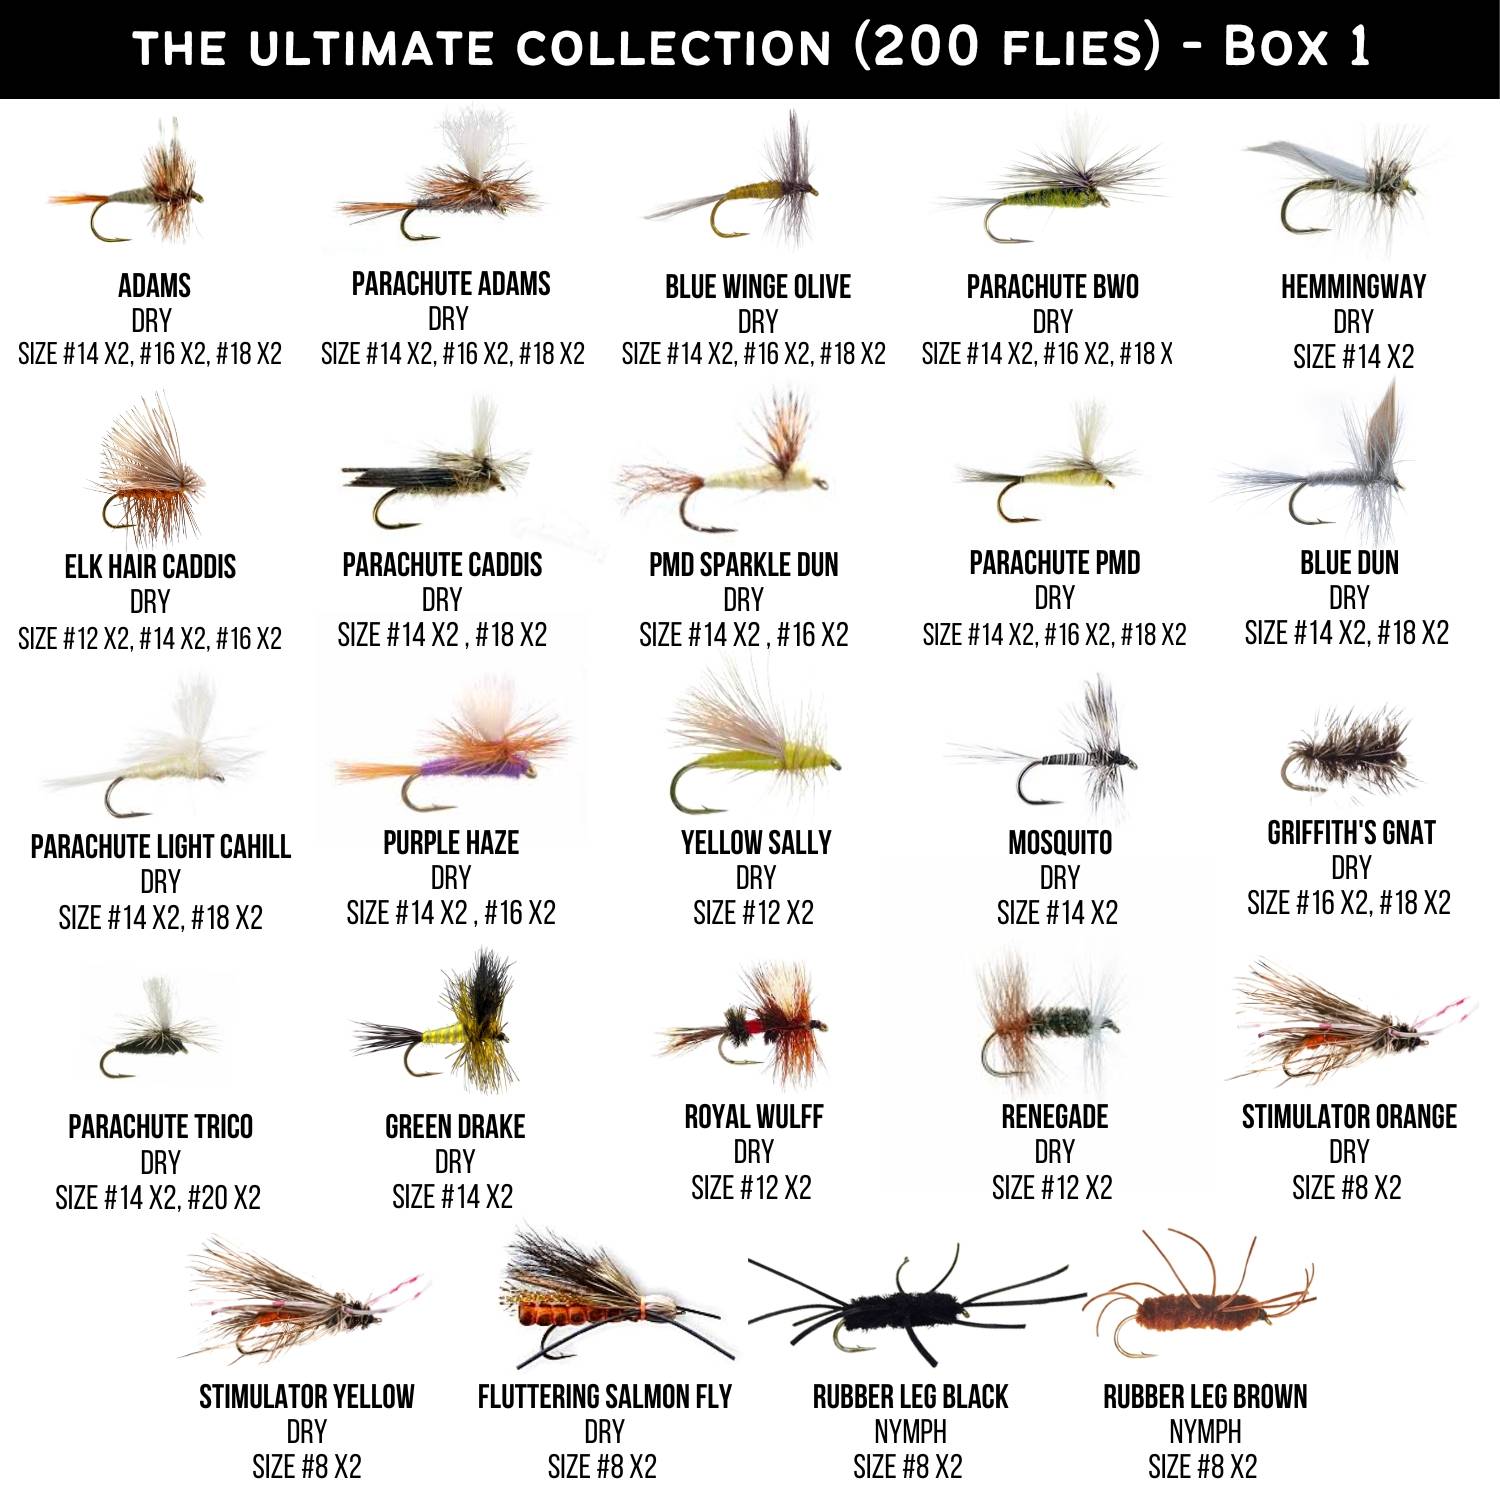 Fly Fishing Flies by Colorado Fly Supply - Epoxy Ant Fly Pattern - Ant  Terrestrial Fly Fishing Lure - Hard Body Ant - Trout Flies and Lures for  Fishermen - Fishing Tackle - 3 Pack of Trout Flies